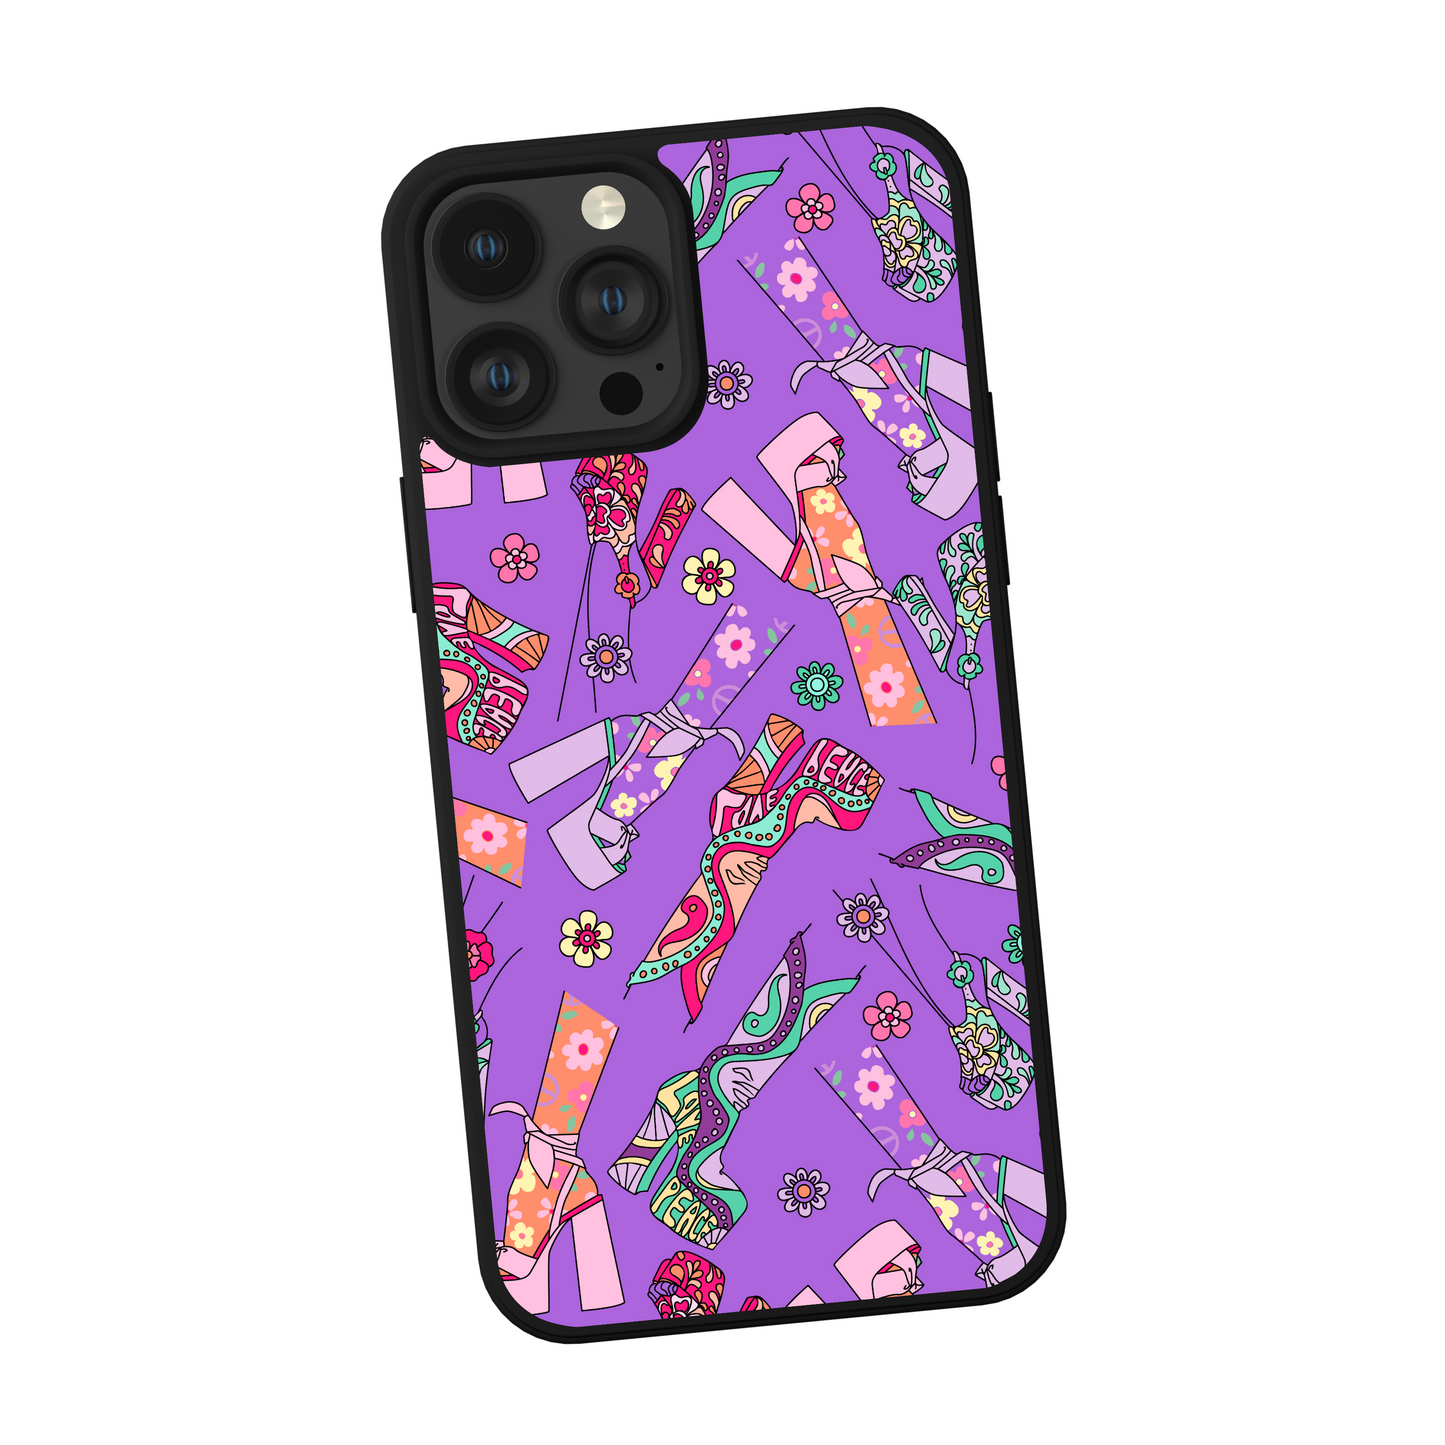 Groovy Shoes iPhone Case